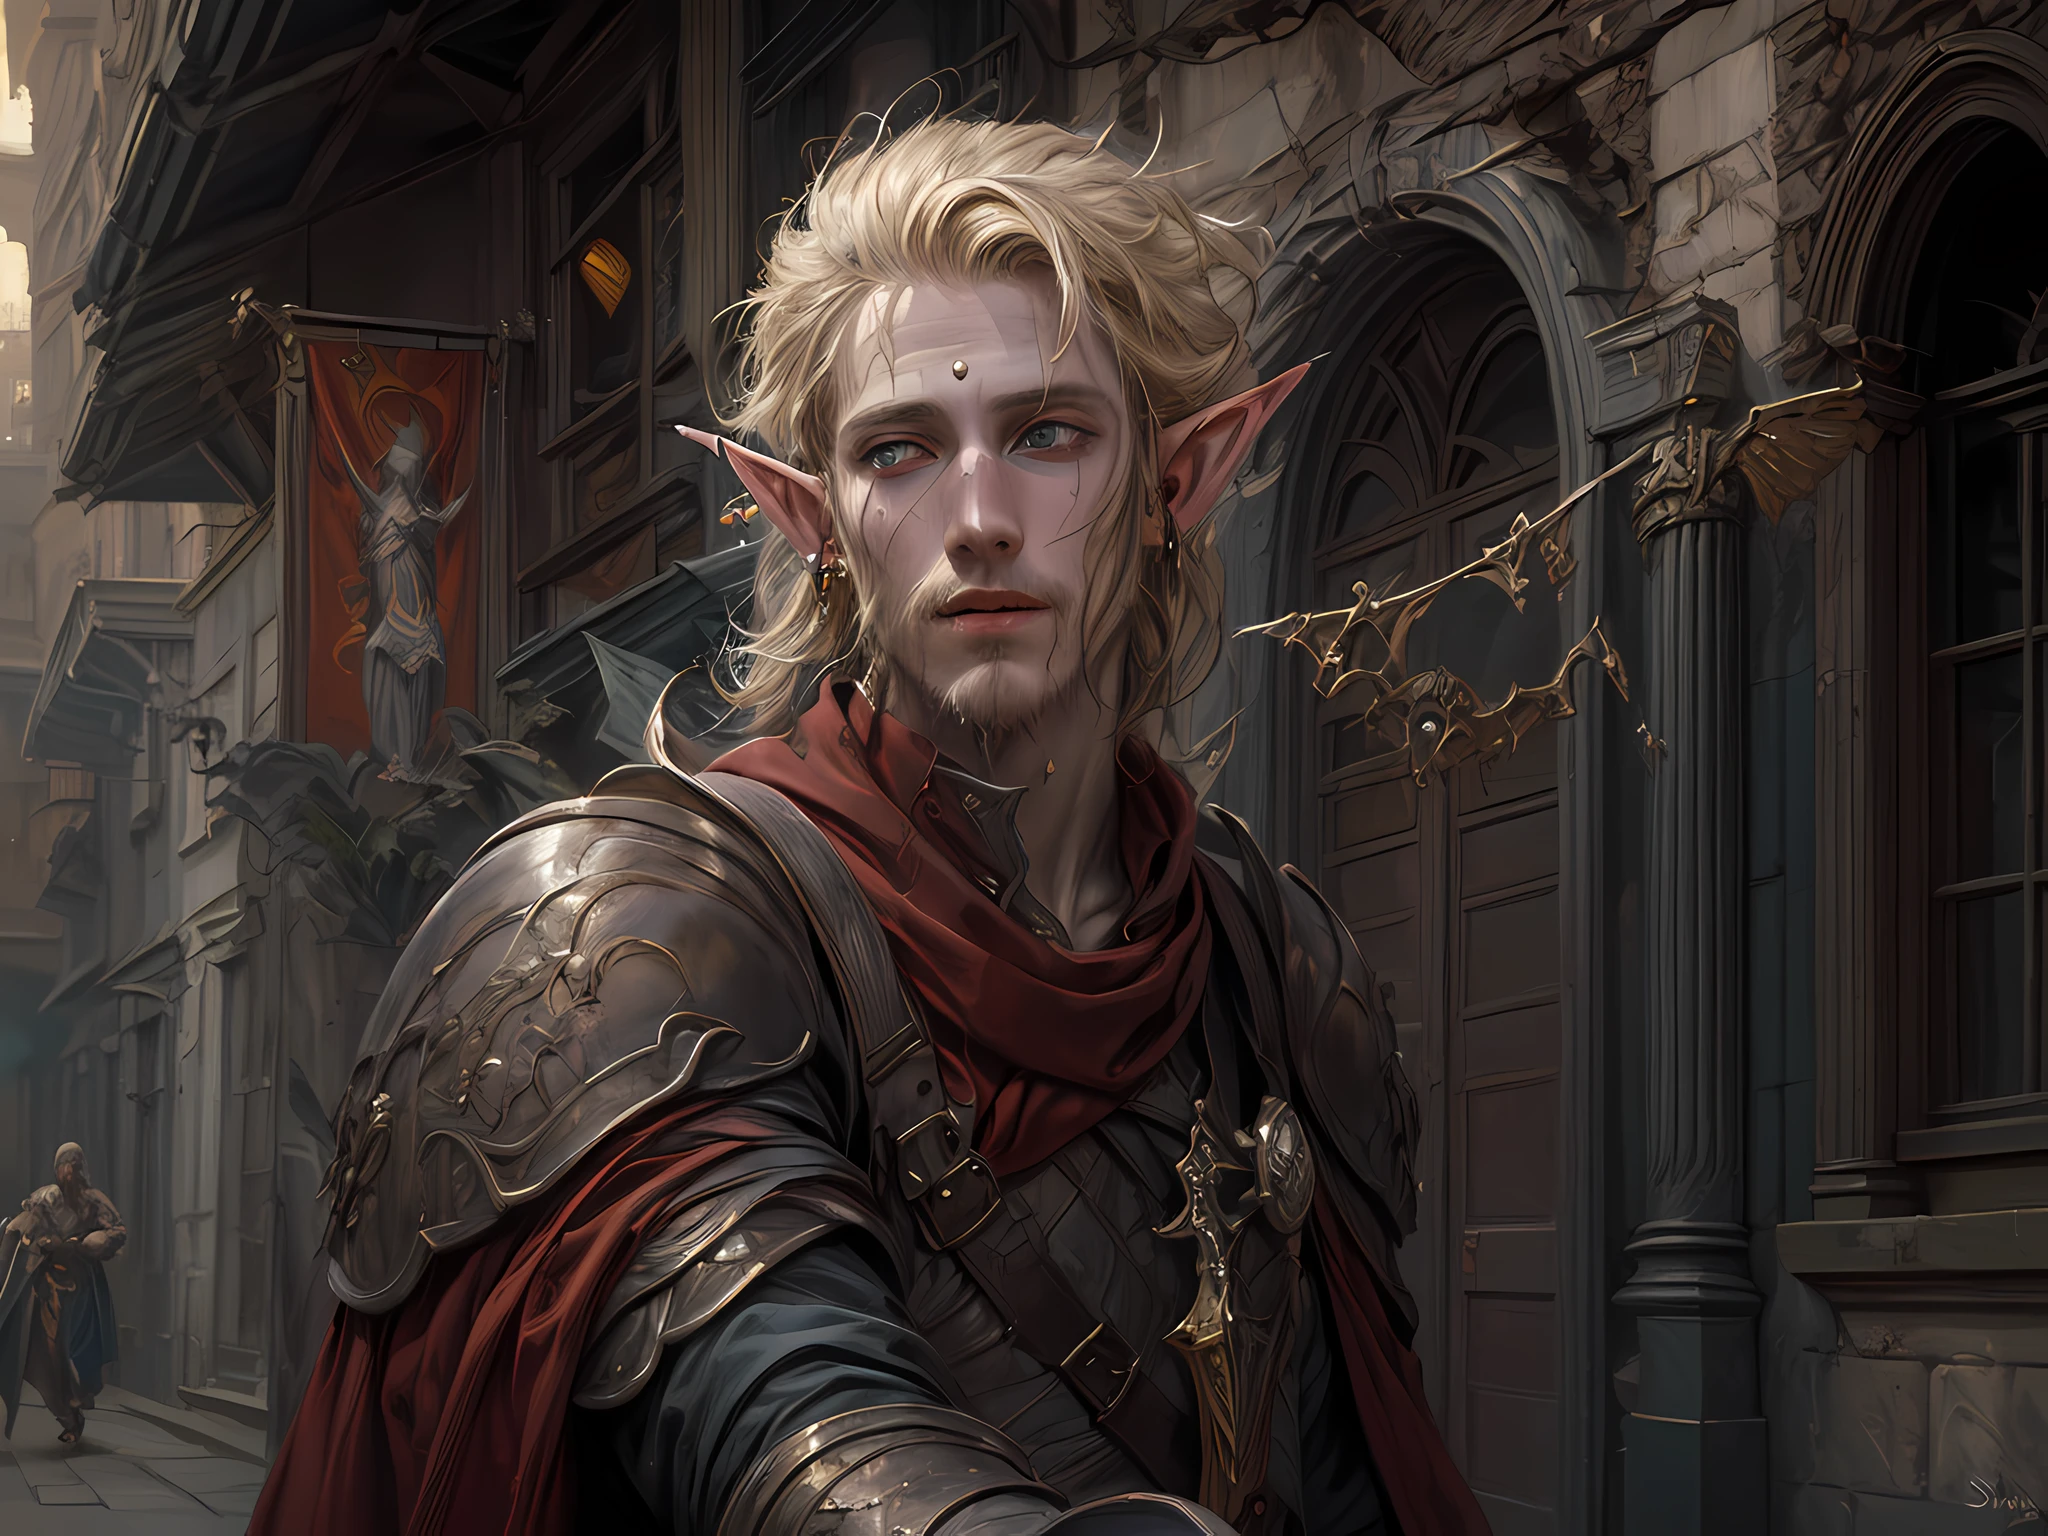 dark fantasy art, dnd art, dark RPG art, wide shot, (masterpiece:1.3), half elf bard in a fantasy street, full body, intense details, highly detailed, photorealistic, best quality, highres, portrait of 1(male: 1.4) half elf (fantasy art, Masterpiece, best quality: 1half elf, male, thin, pale skin, (dirt on face: 1.2), intense details facial detail (gritty fantasy art, Masterpiece, best quality: 1.4) bard, exquisite beauty, (blond hair: 1.3), (smirking in arrogance: 1.2), (dirt on face: 1.3), (grime on face: 1.3) (small pointed ears: 1.3), intense azure eyeantasy art,  Masterpiece, best quality: 1.3) holding a (small lyre: 1.4) (fantasy art, Masterpiece, best quality: 1.4) wearing heavy (heavy armor, wearing) CM-Beautiful_armor,  wearing leather boots, wearing a cloak, a sword slung on his back (fantasy art, Masterpiece, best quality: 1.3), smiling an arrogant smile, standing in gritty fantasy street, there are (dark red clouds: 1.3) , (dark yellows clouds: 1.3) above, sense of gloom, sense of dread, depth of field, reflection light, high details, best quality, 16k, [ultra detailed], masterpiece, best quality, (extremely detailed), dynamic angle, ultra wide shot, photorealistic, RAW, fantasy art, dnd art, fantasy art, realistic art